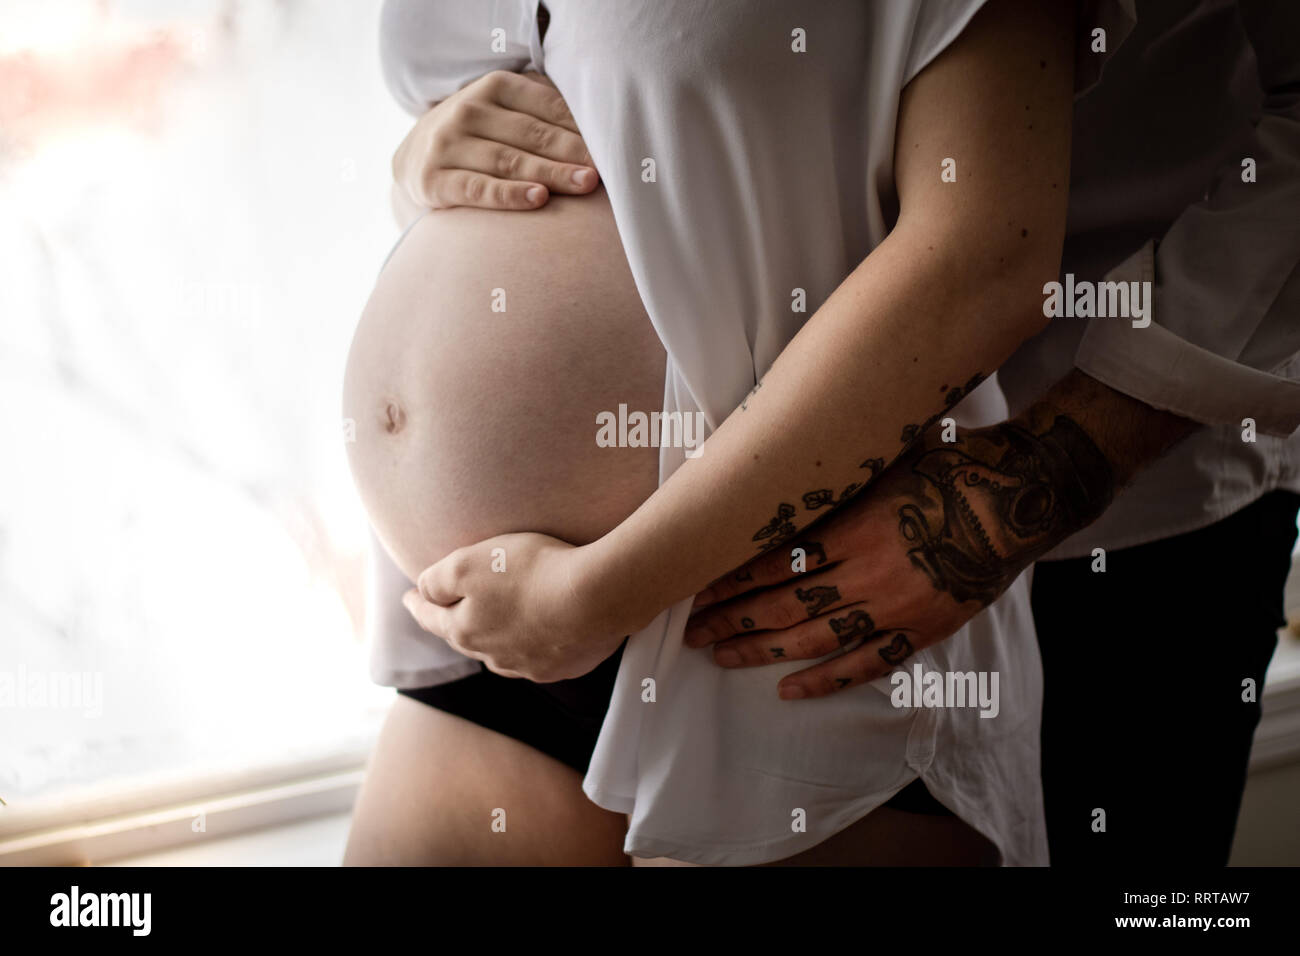 Dad's fingertips touch her belly, thinking about the life growing within. Stock Photo